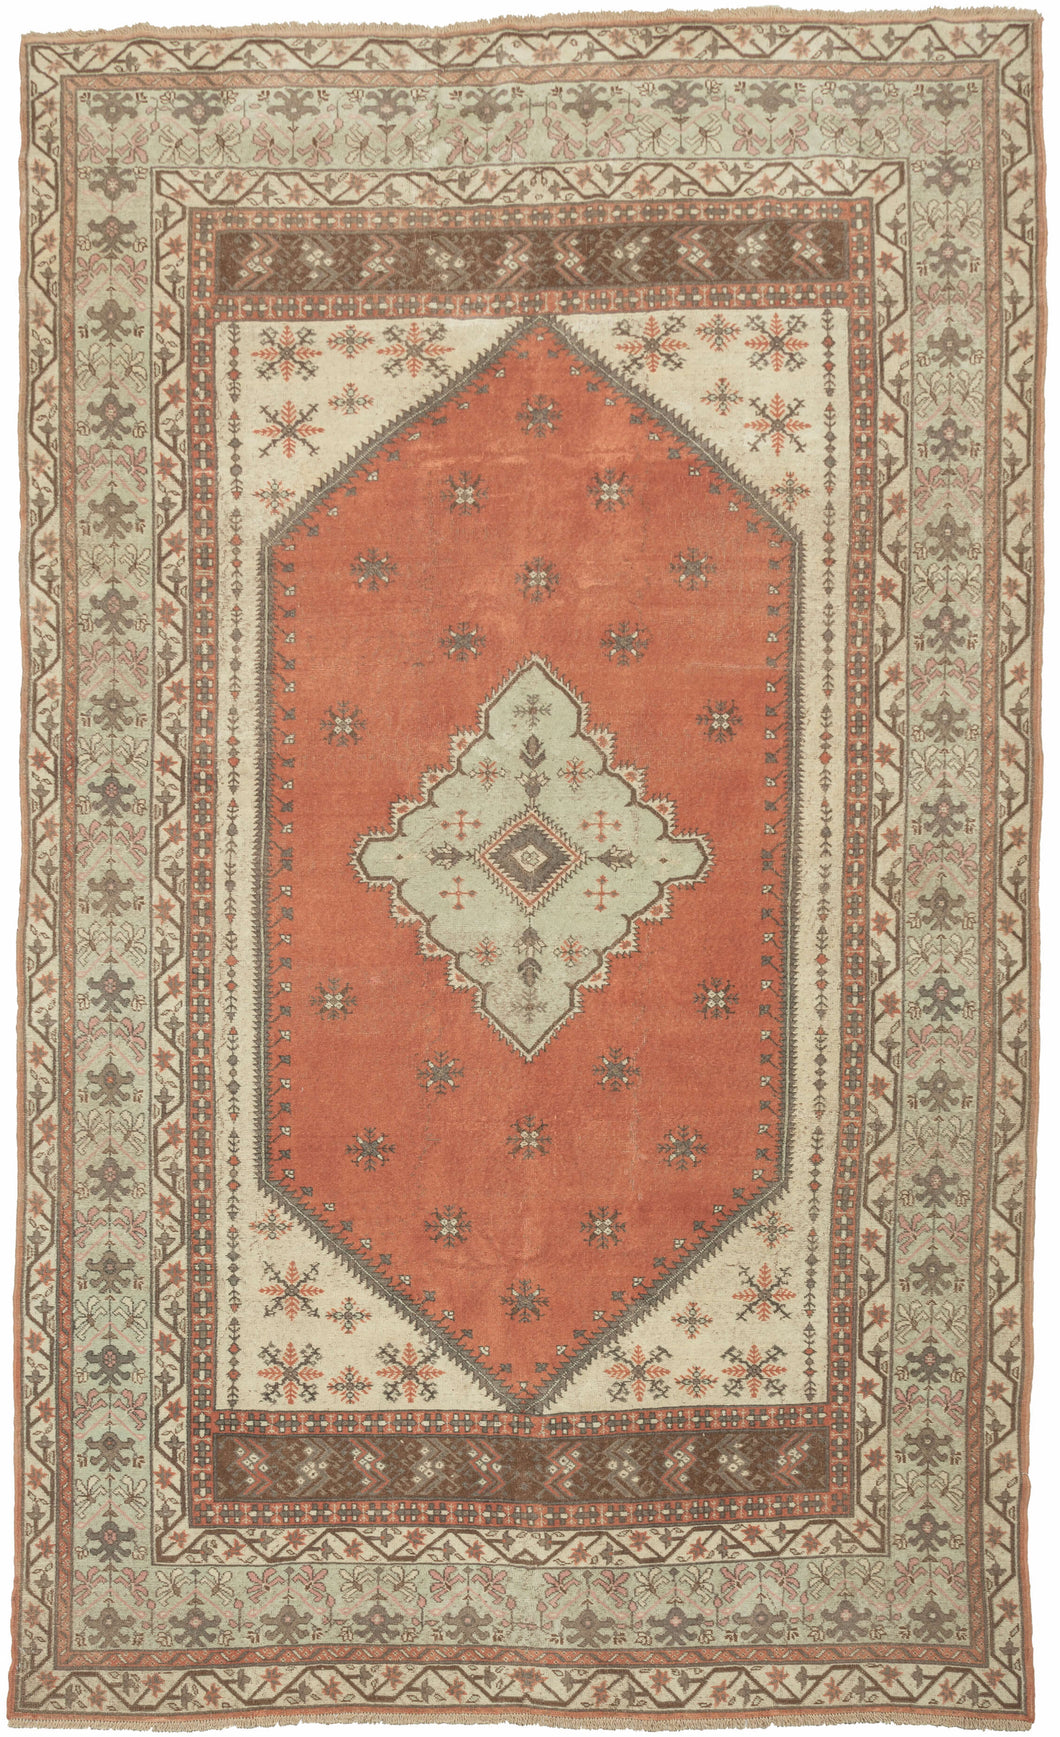 This vintage anatolian rug features a seafoam medallion on a burnt orange ground with ivory cornices. The field and cornices feature well-structured and nicely spaced burr-like forms. The main border features vegetal forms on the same seafoam ground as the central medallion is sandwiched between matching minor borders of scrolling blossoming vines on an ivory ground.  